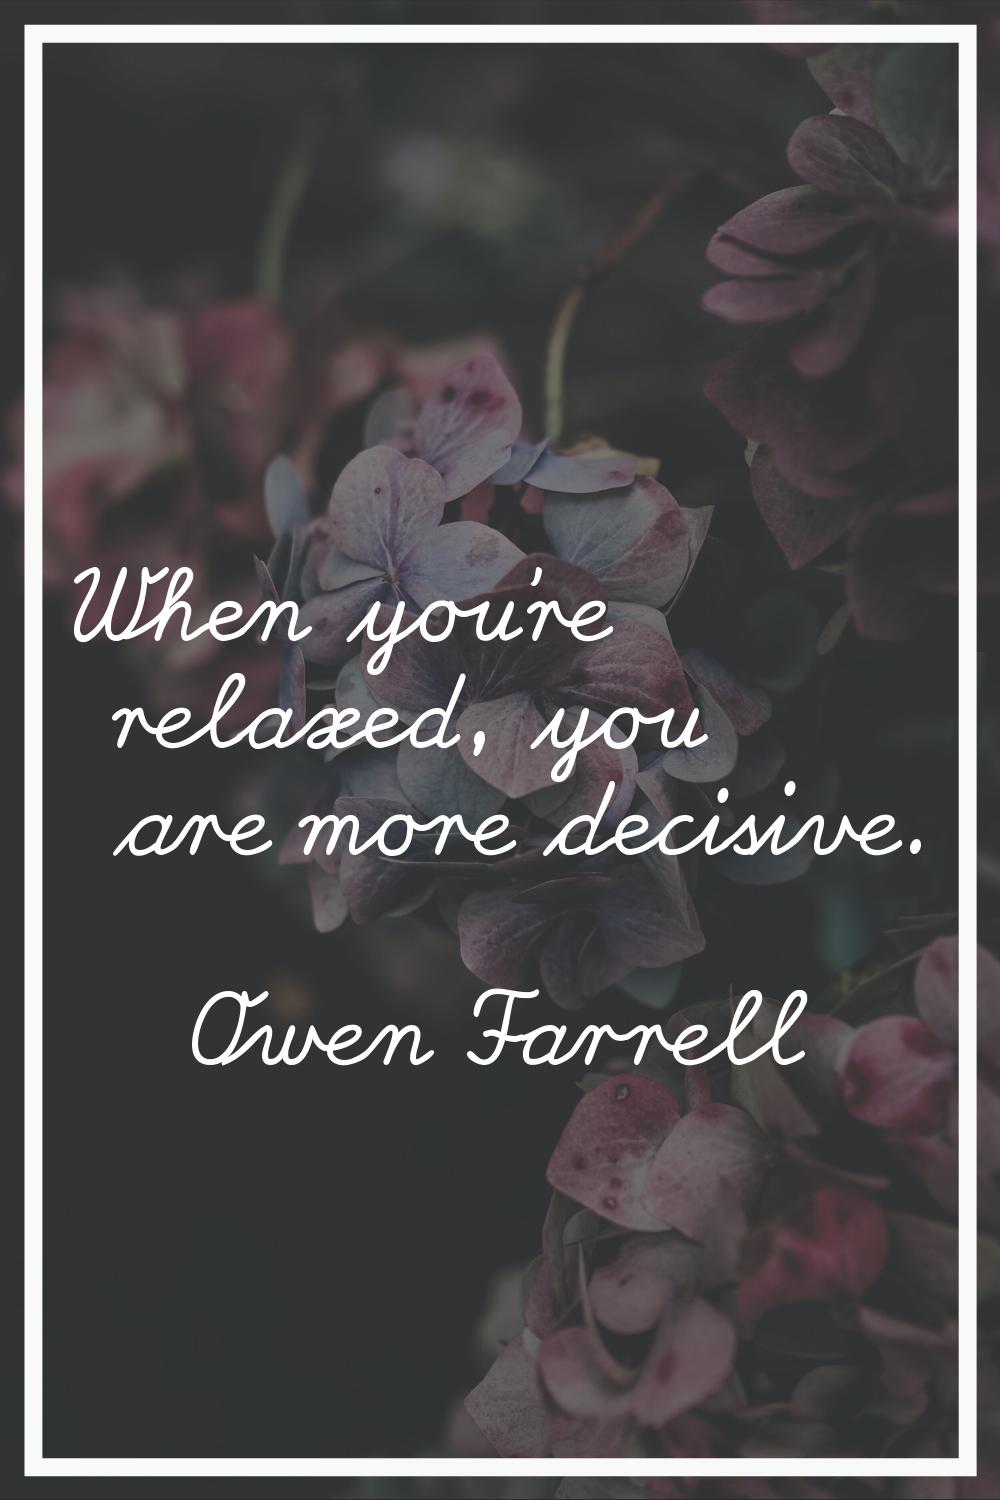 When you're relaxed, you are more decisive.